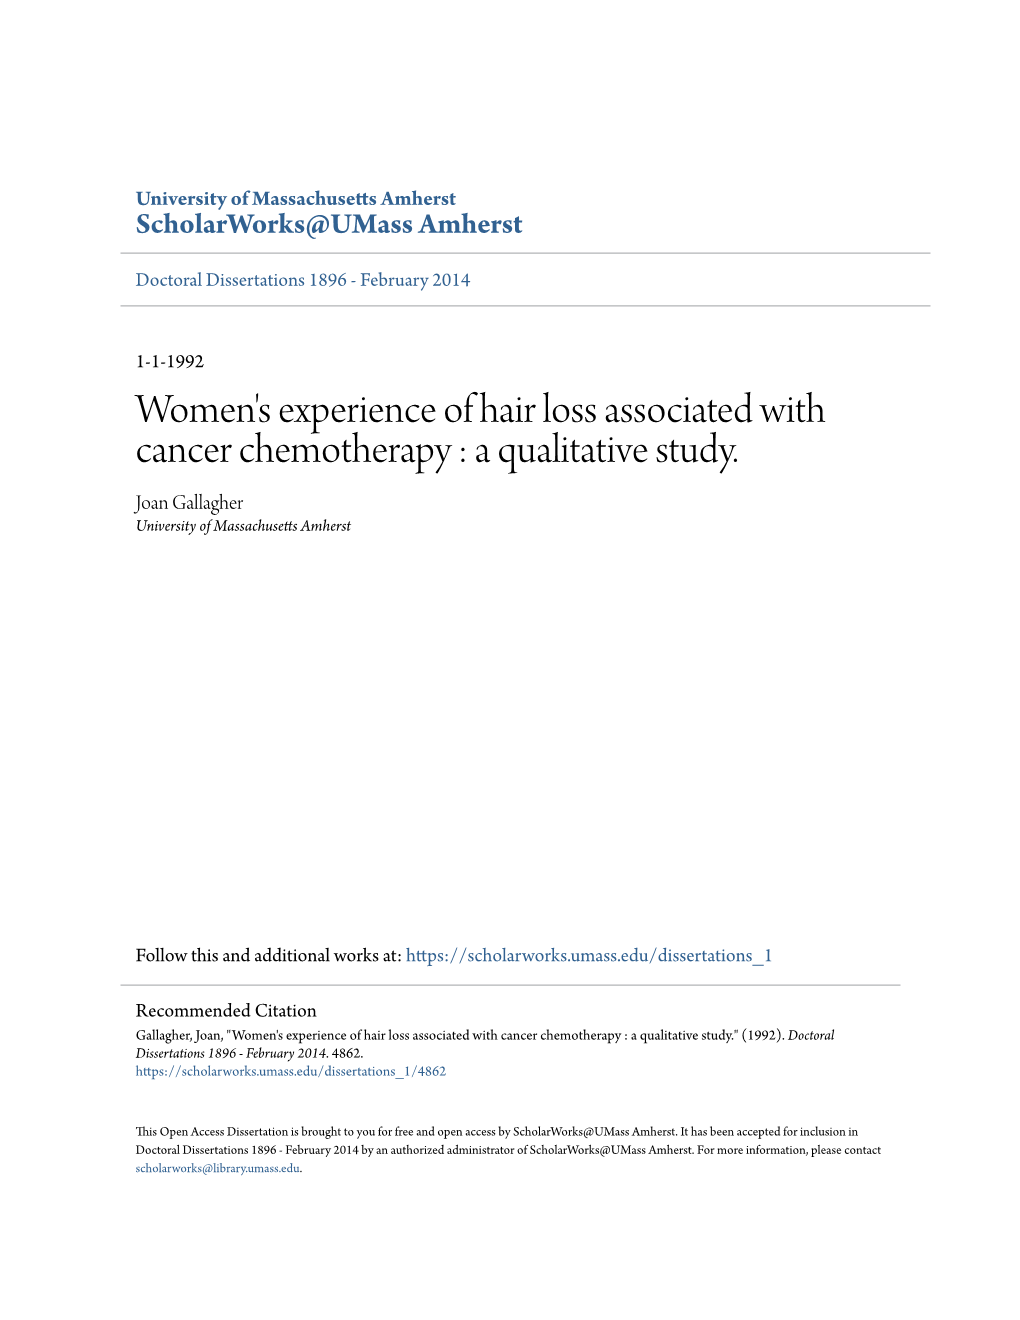 Women's Experience of Hair Loss Associated with Cancer Chemotherapy : a Qualitative Study